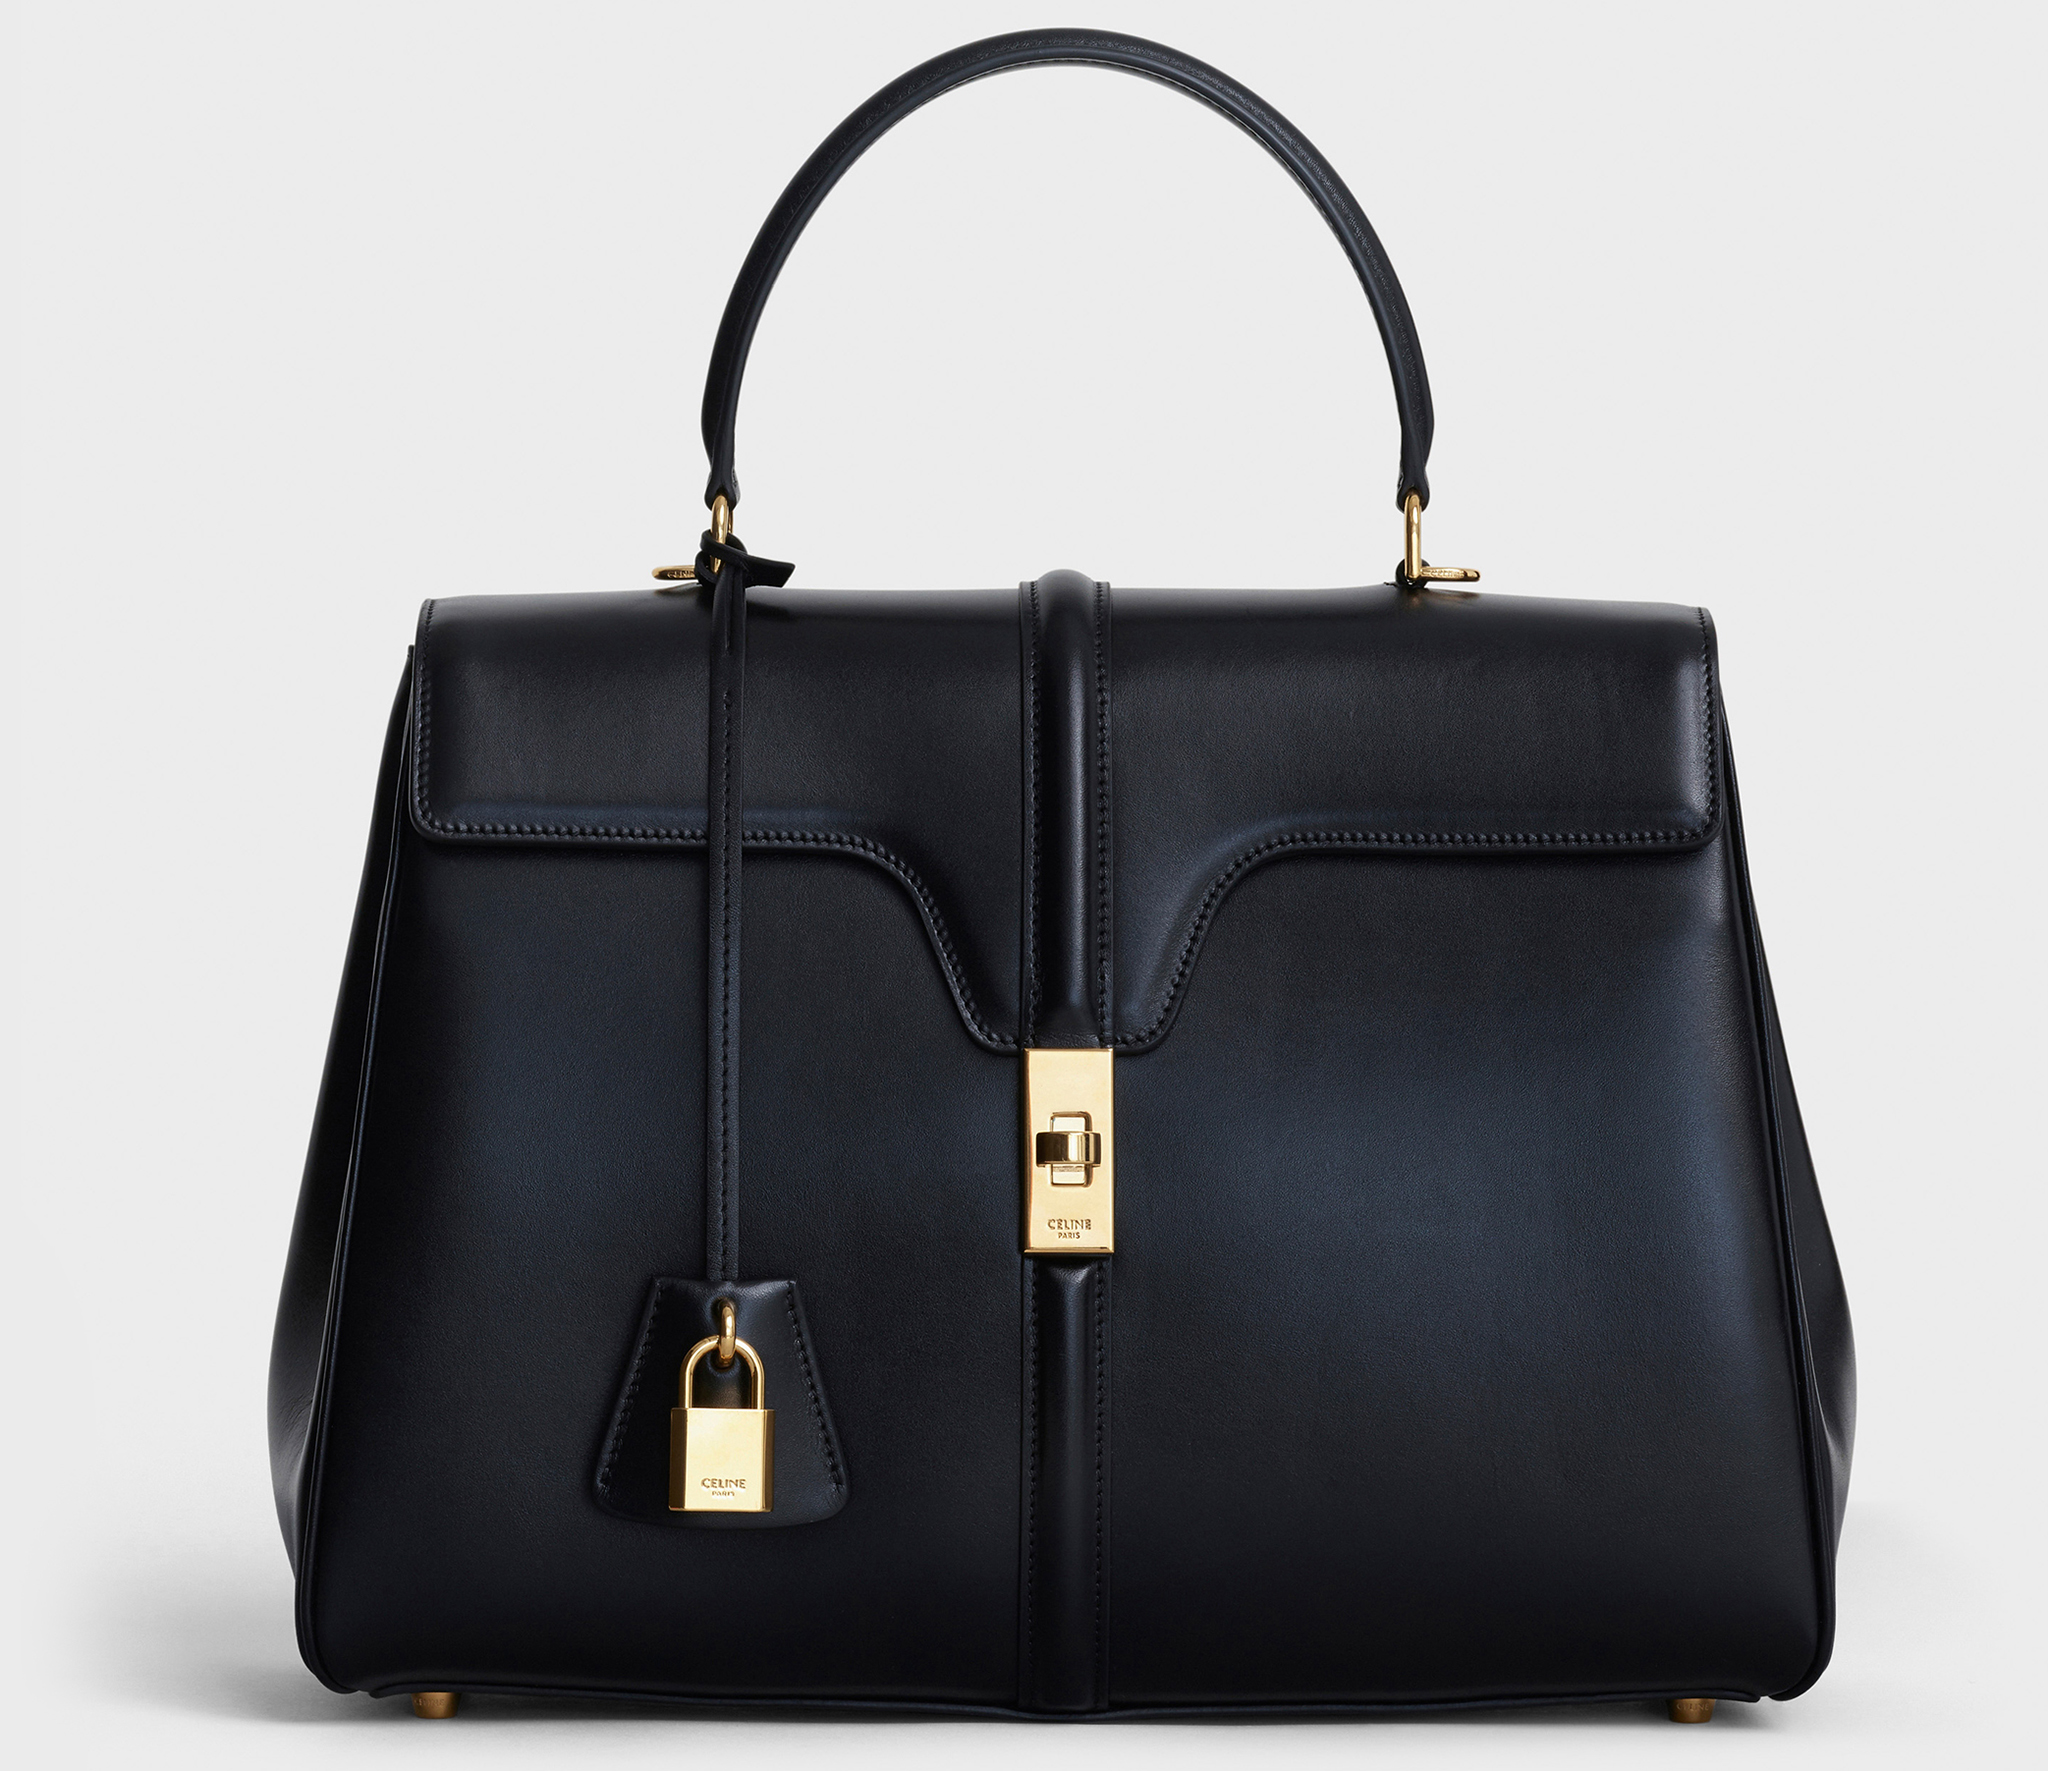 A classic bag made of satinated calfskin leather, the Celine 16 has a removable shoulder strap, a top handle and a twist-lock closure on the flap